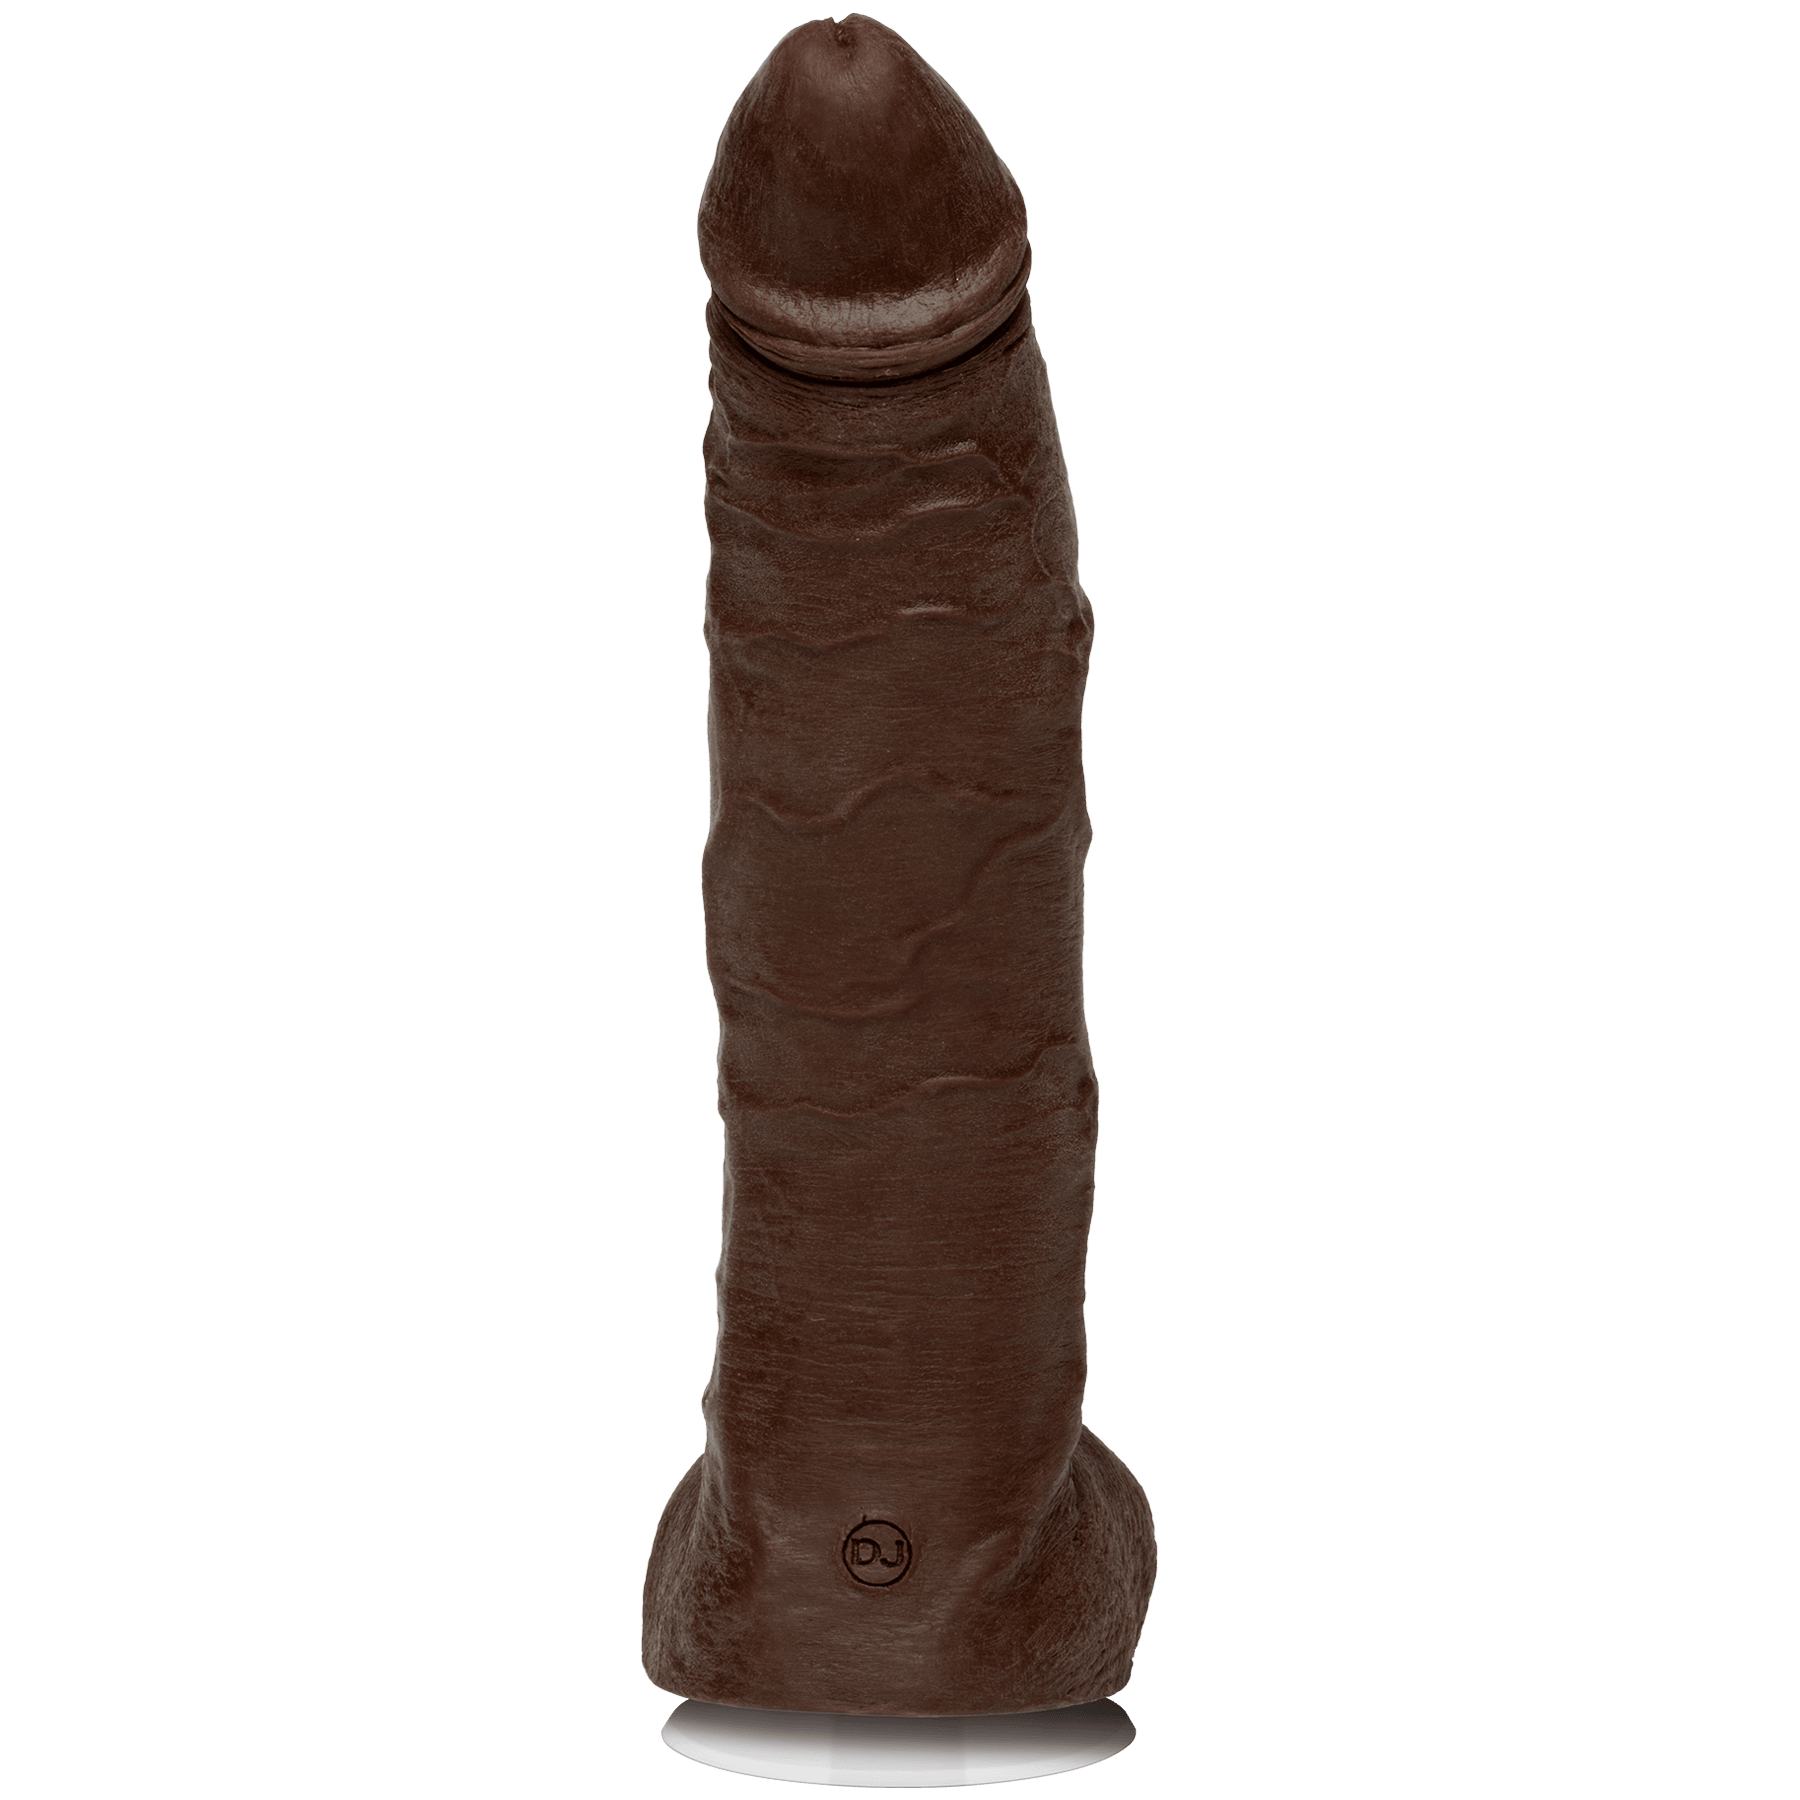 Doc Johnson Signature Cocks Jason Luv 10in Cock - Buy At Luxury Toy X - Free 3-Day Shipping